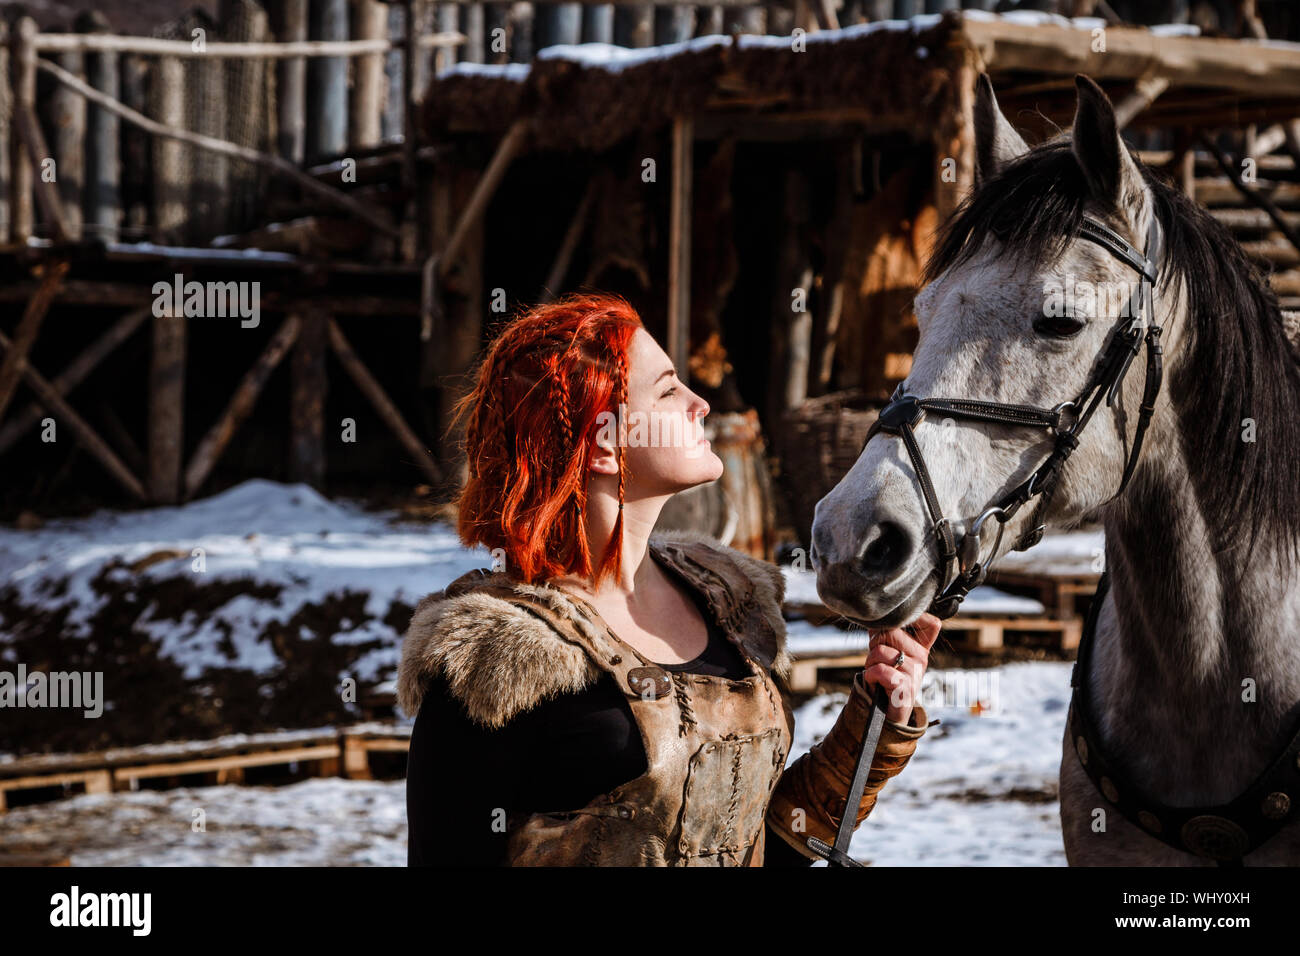 Red-haired woman with a faithful horse preparing for battle Stock Photo